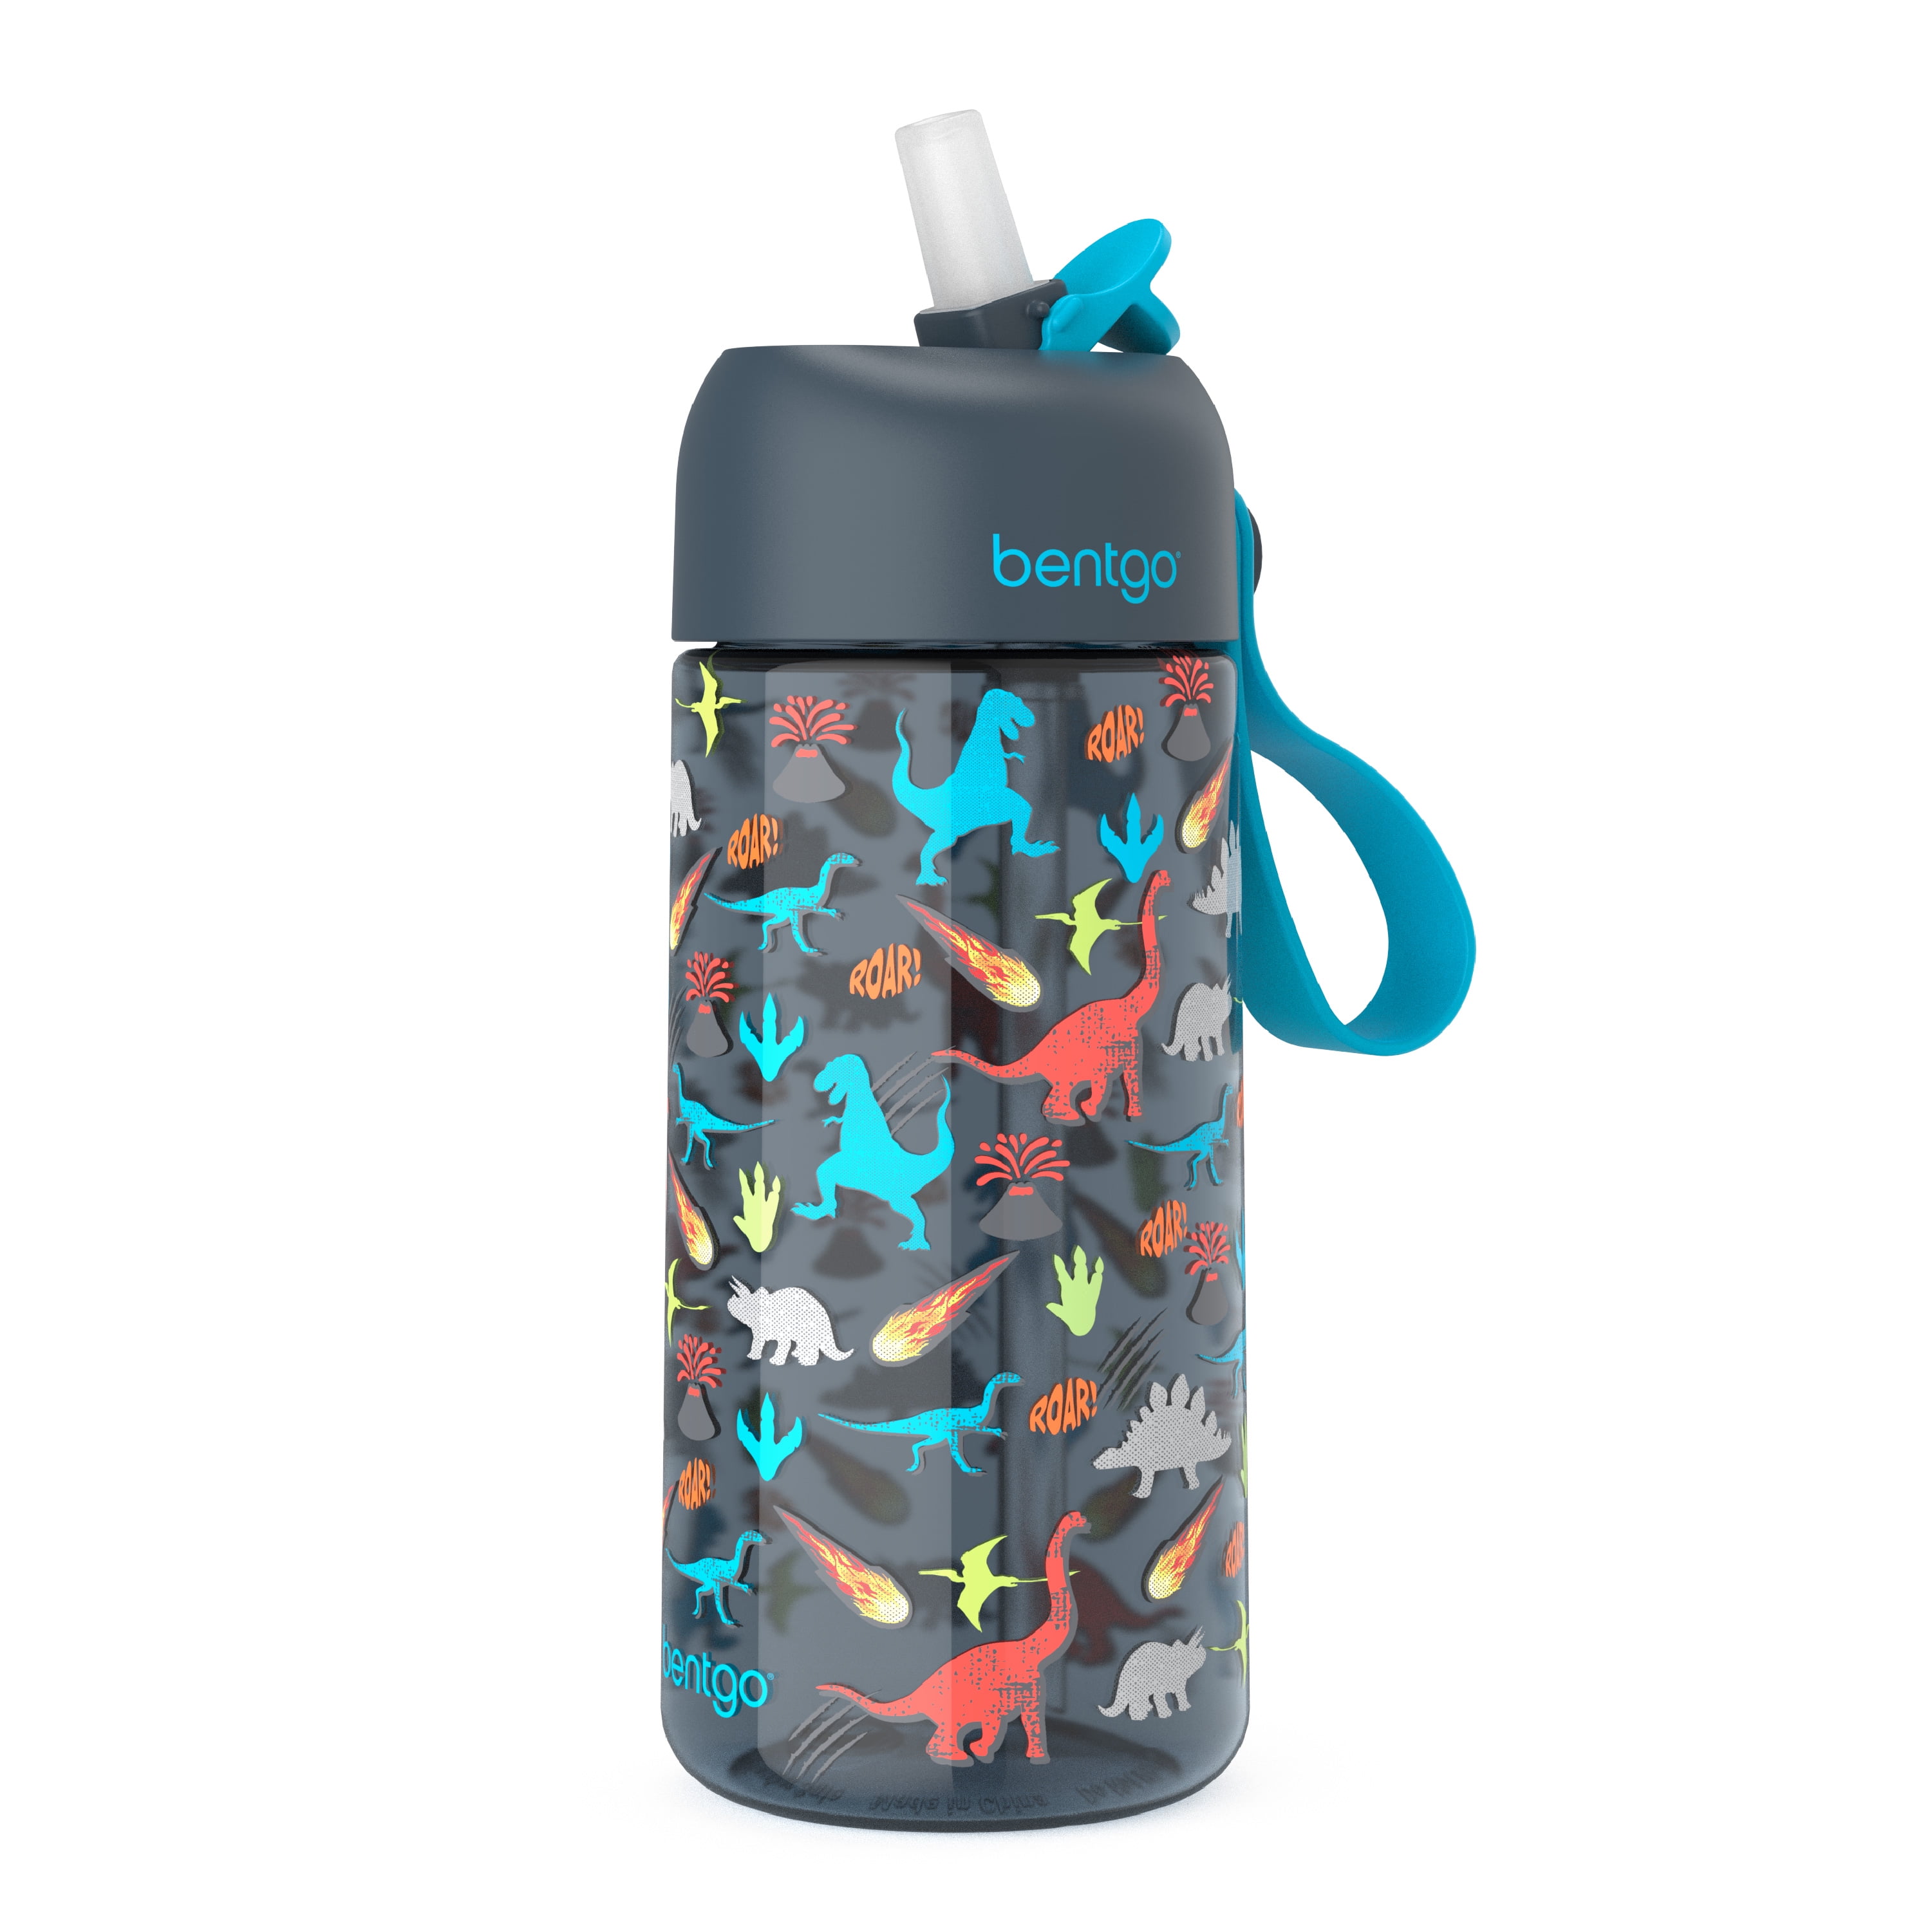 Oldley Kids Water Bottle 12 oz BPA Free Reusable with Straw/Chug 2 Lids  Leak-Proof Ideal Gift for Toddler Boys Girls